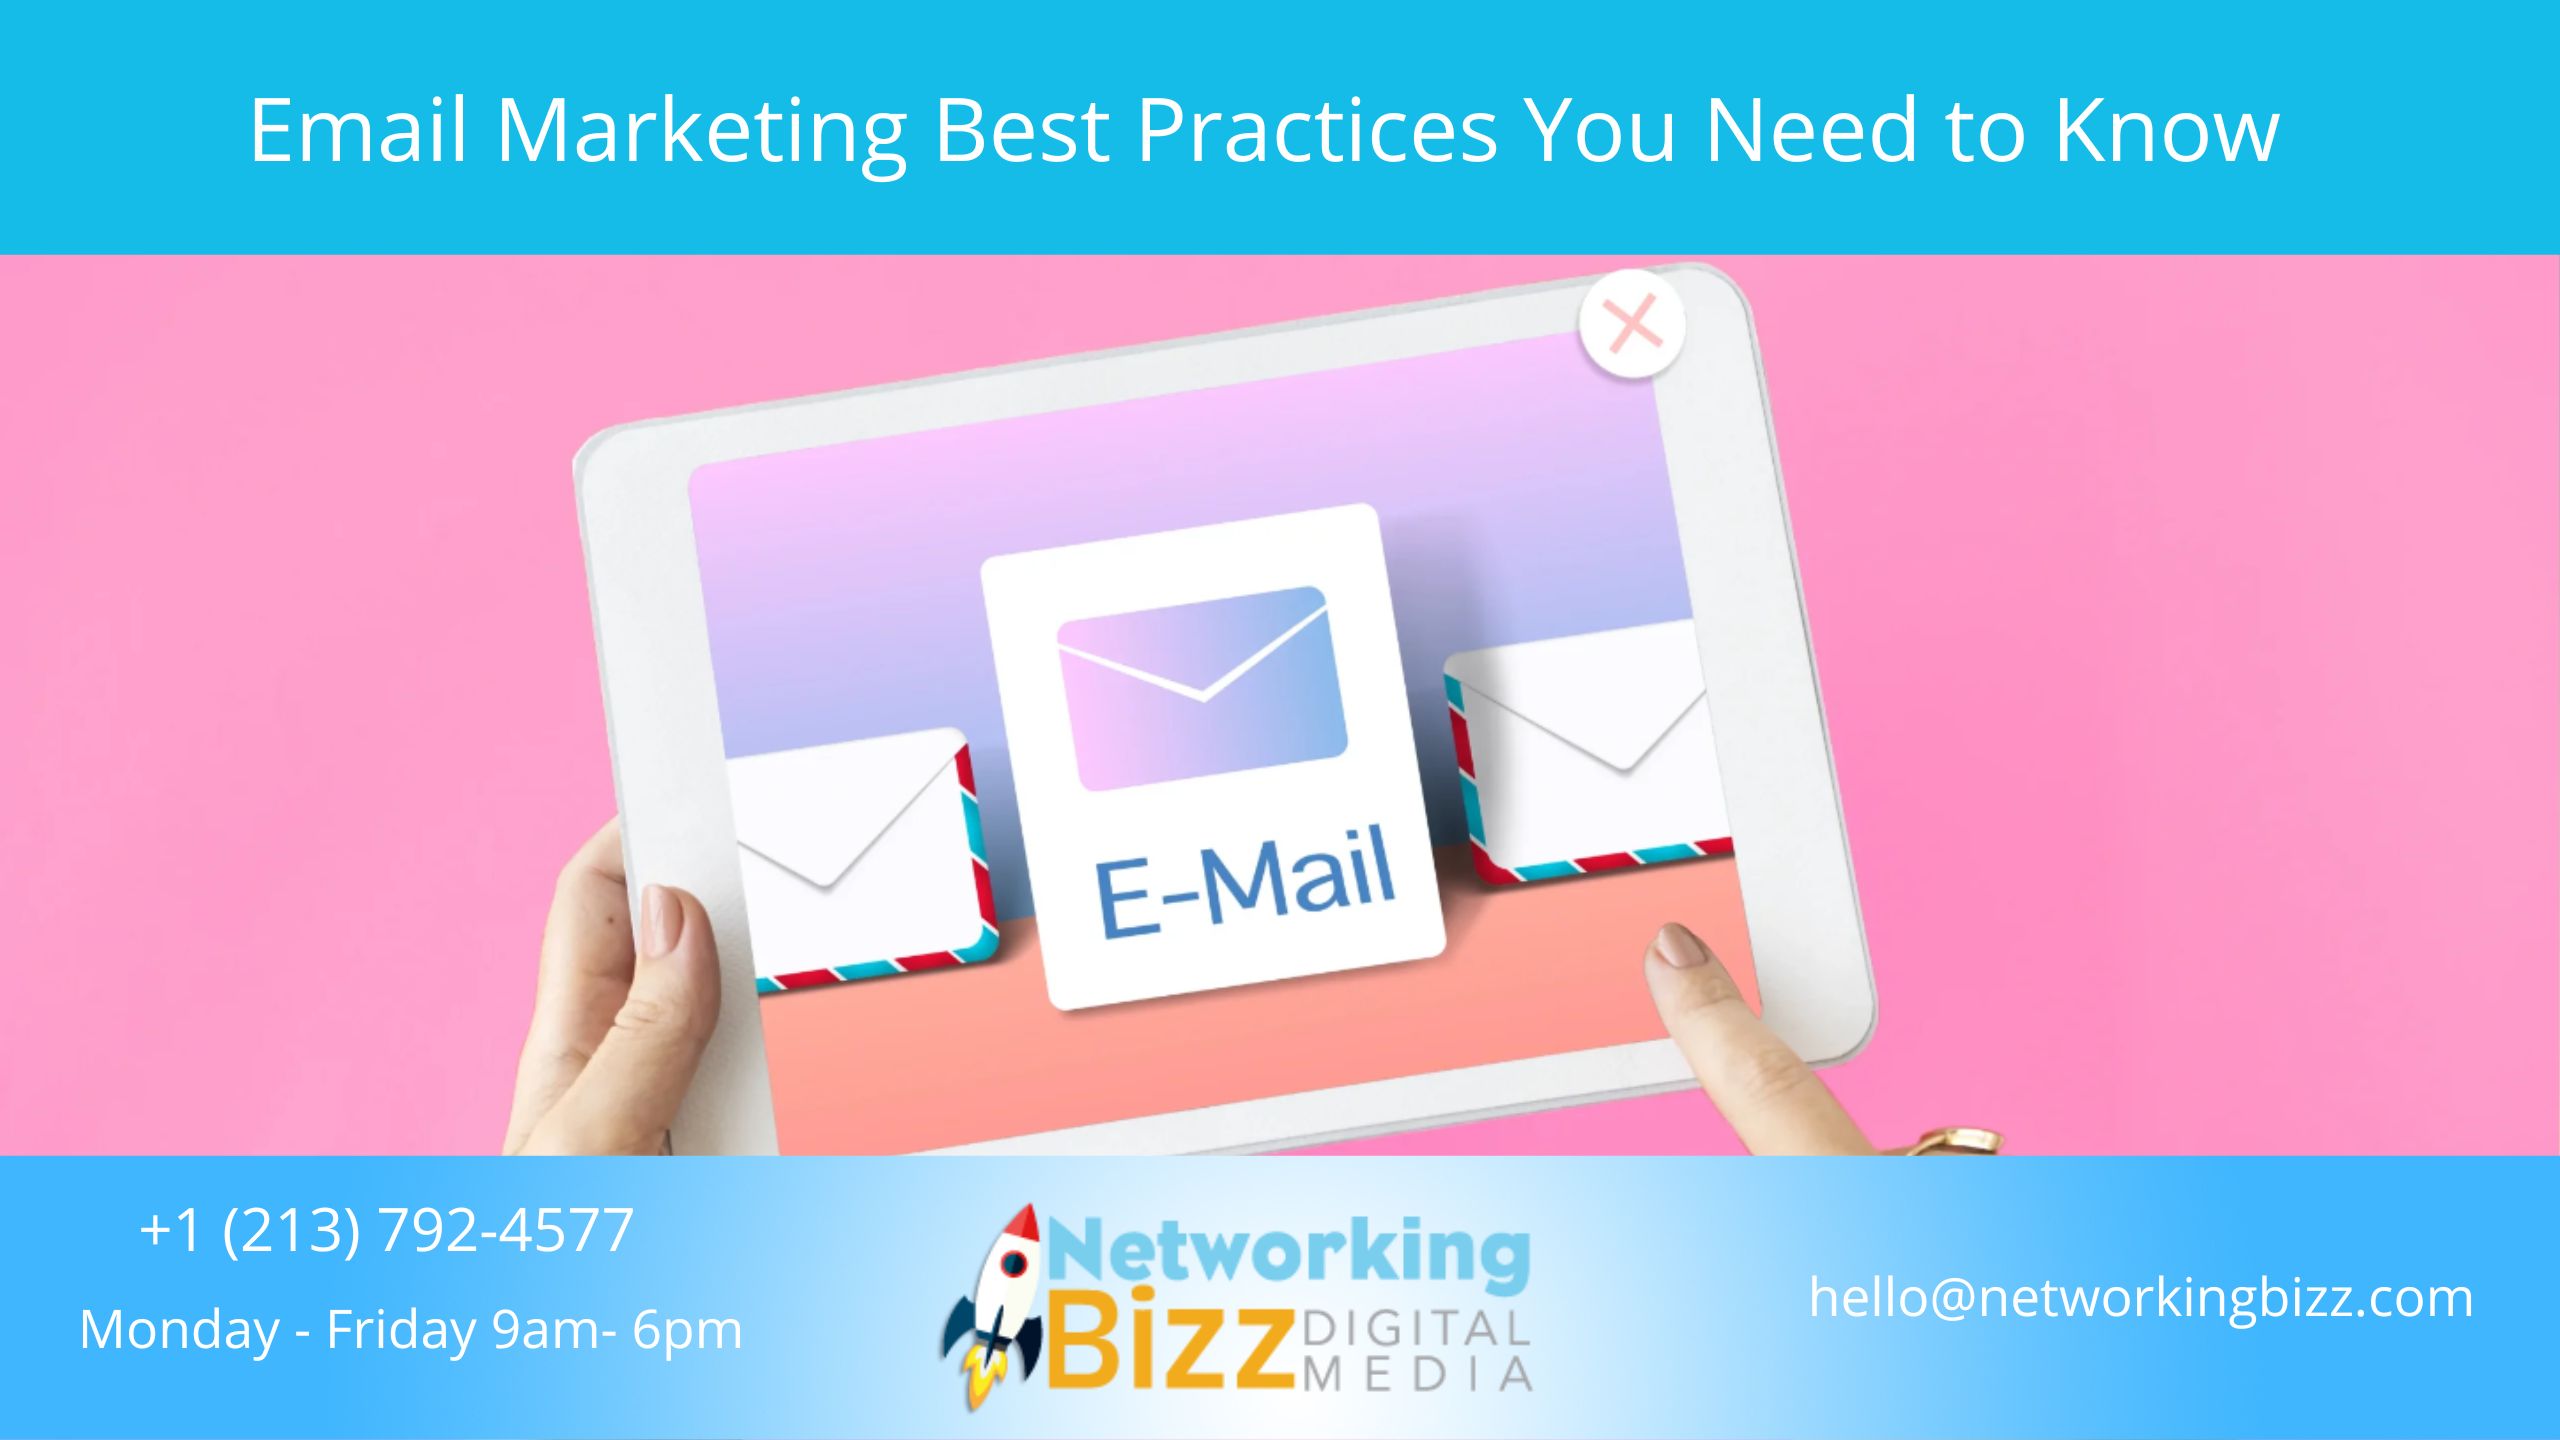 Email Marketing Best Practices You Need to Know